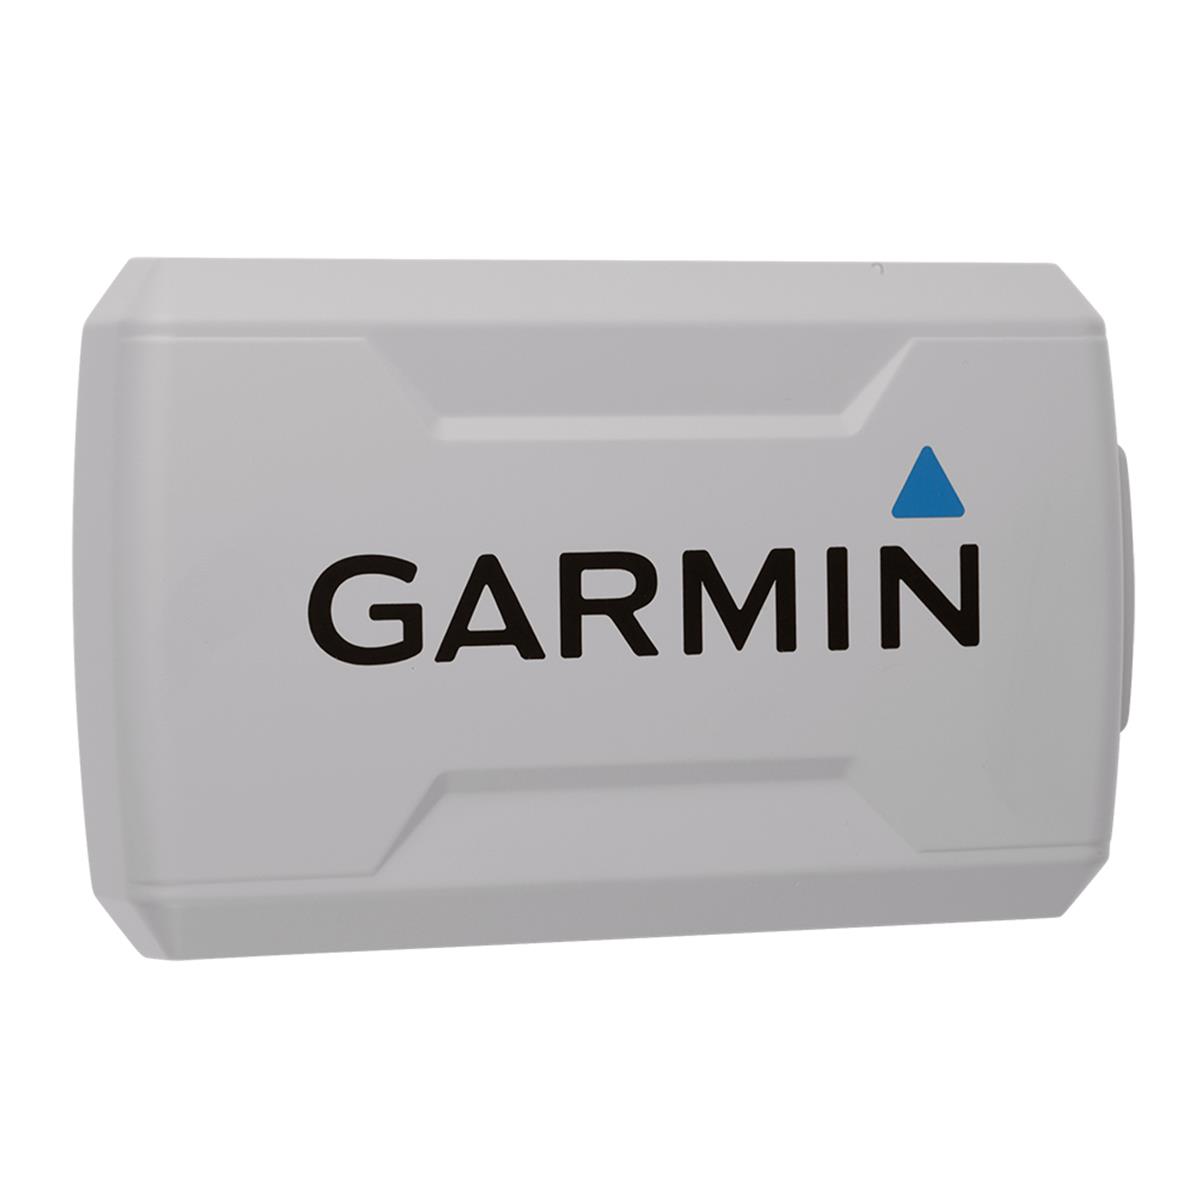 Picture of Garmin 010-13130-00 Protective Cover for Striker Plus & Vivid 5 in. Units